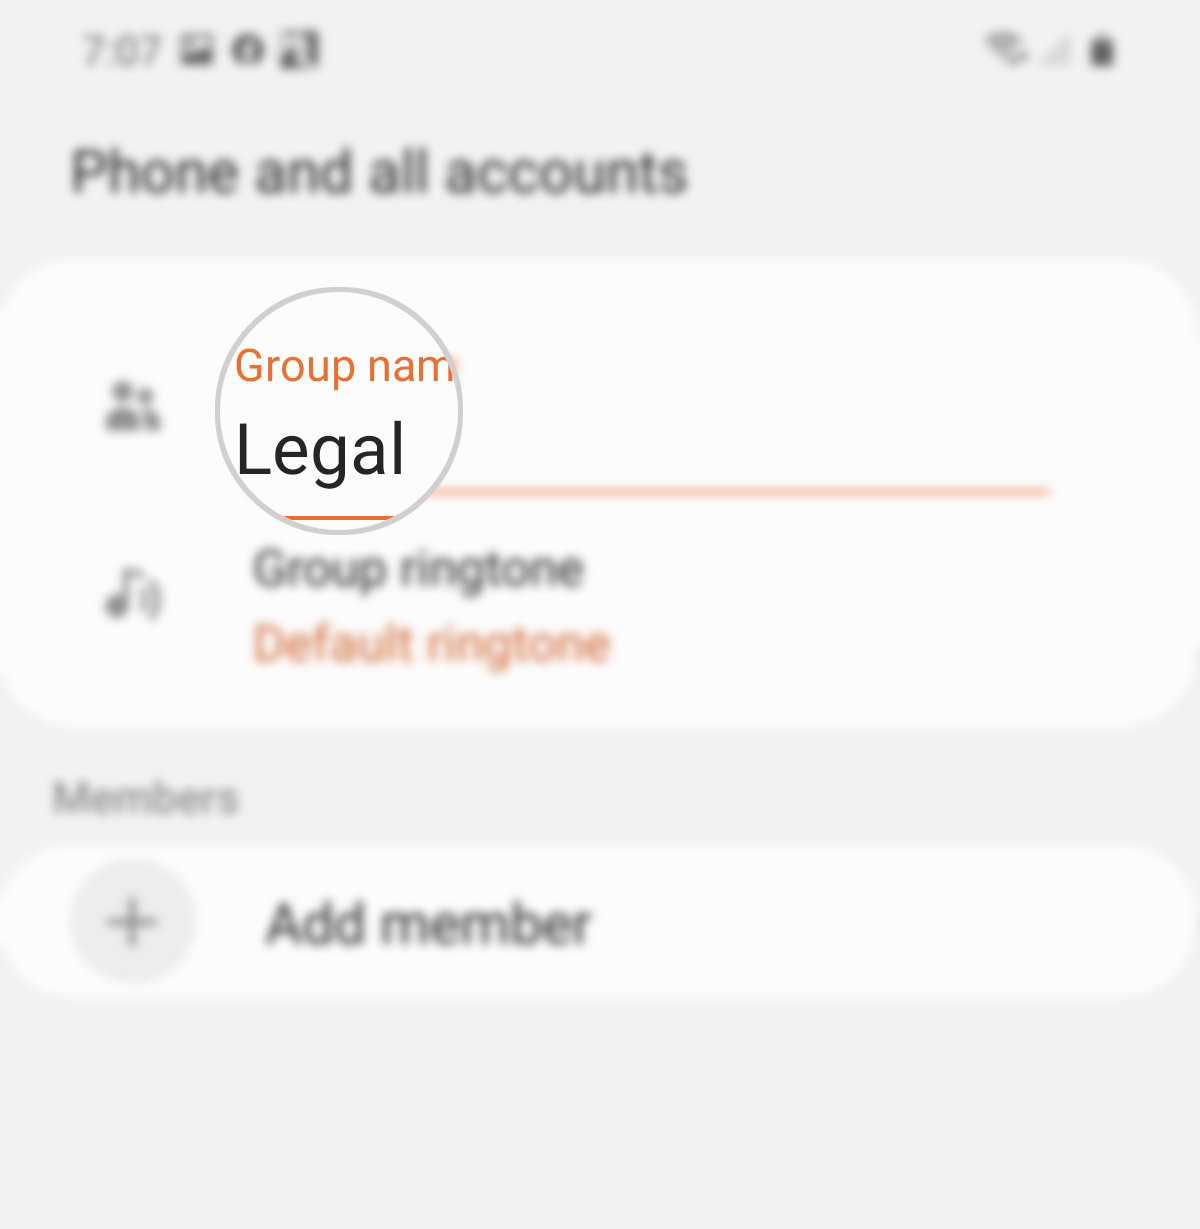 create a group contact on galaxy s20 - enter group name